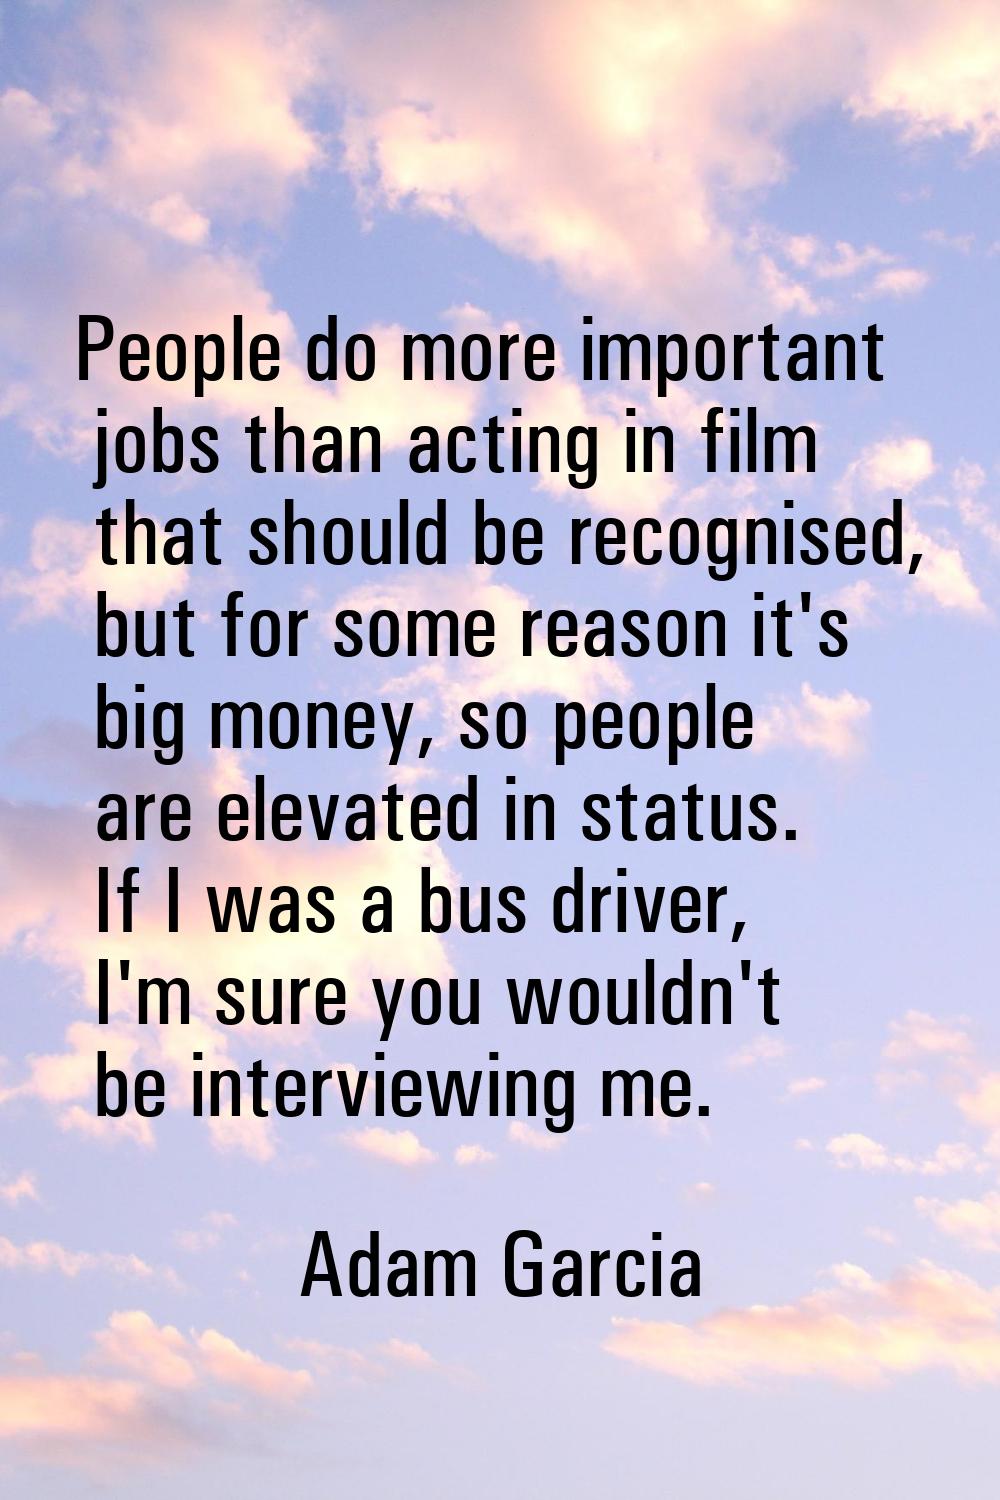 People do more important jobs than acting in film that should be recognised, but for some reason it